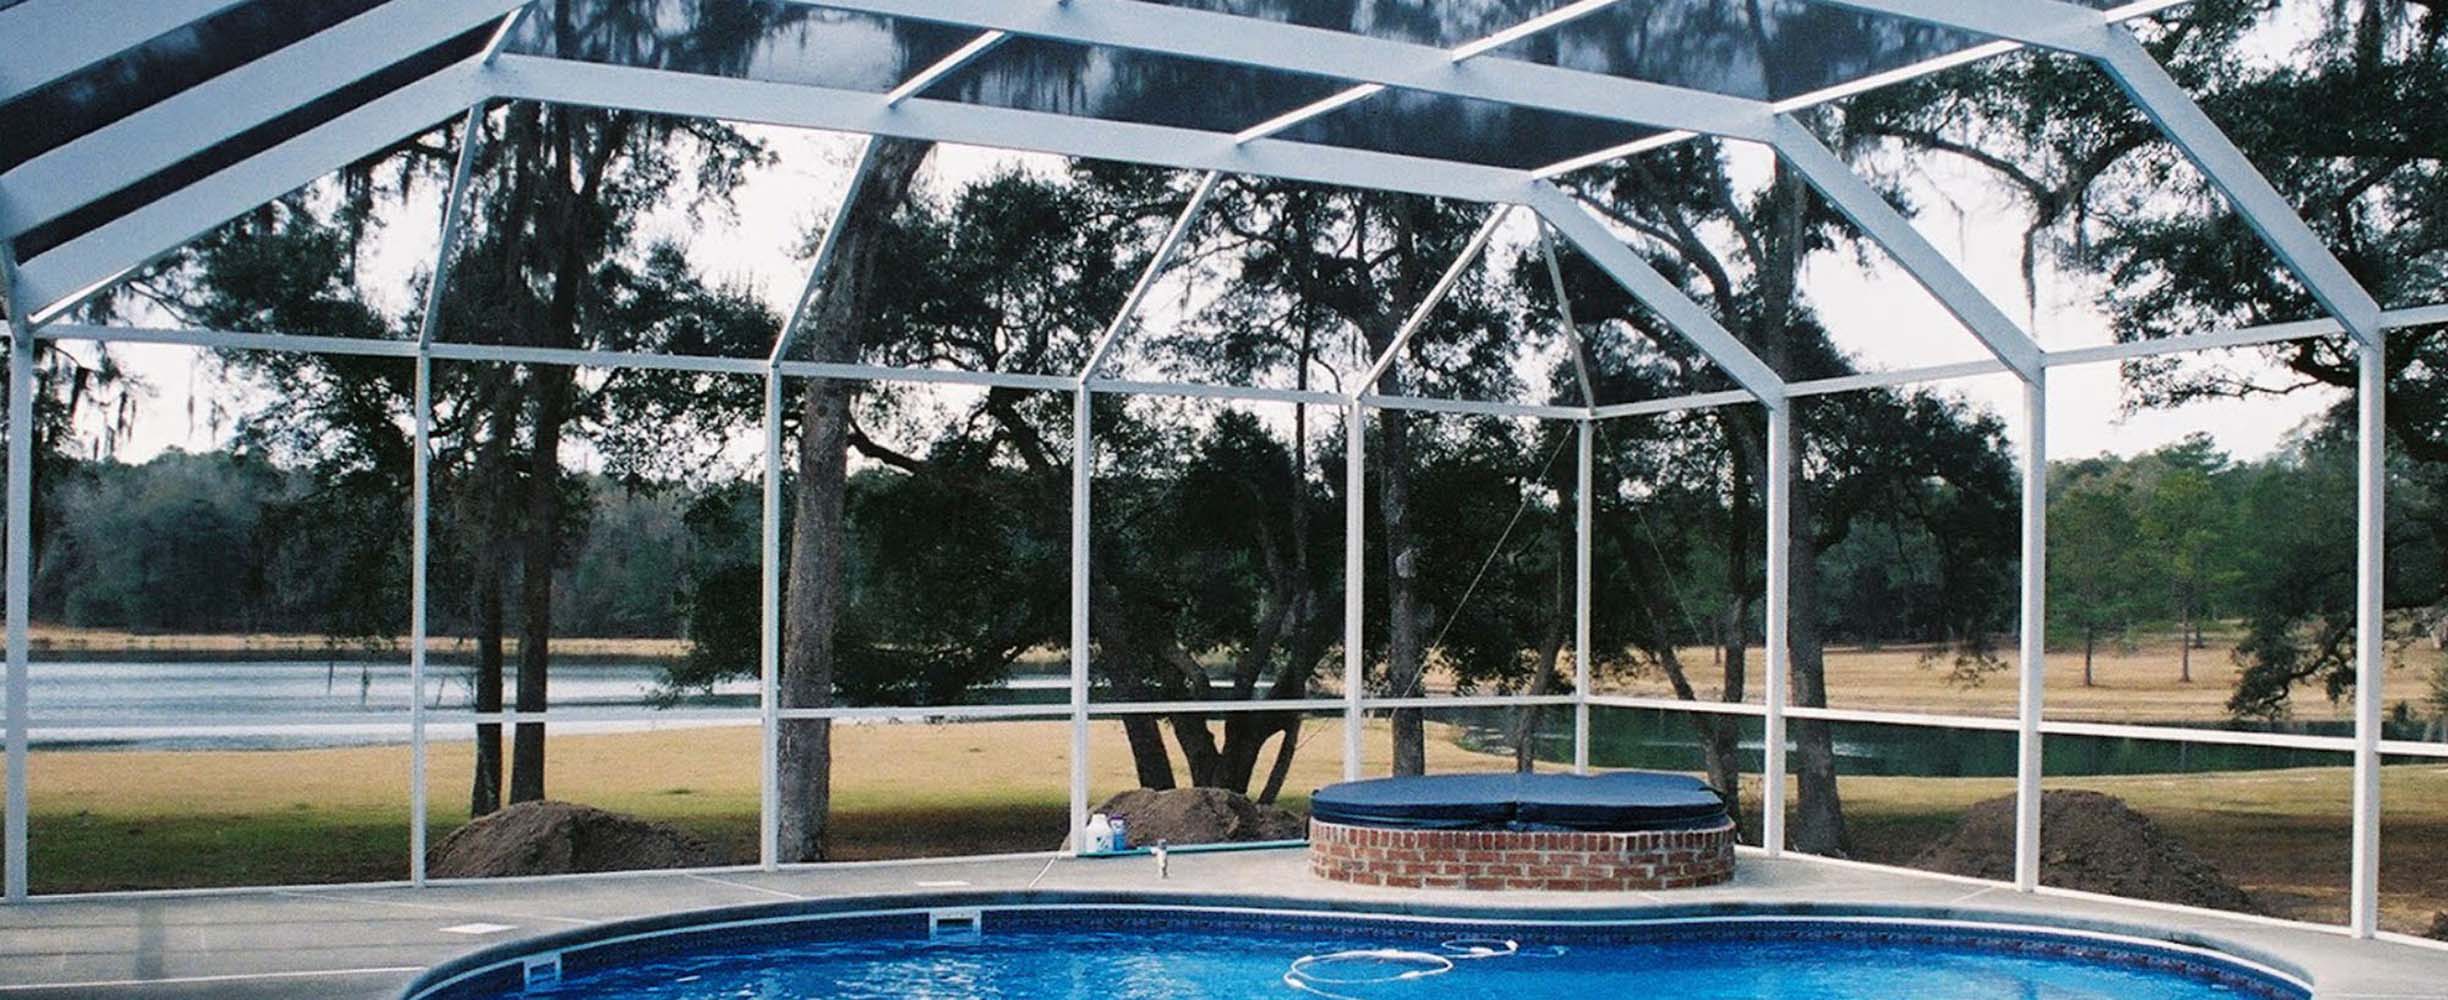 Custom pool enclosure designed to fit the pool and garden and implemented in few days and on budget